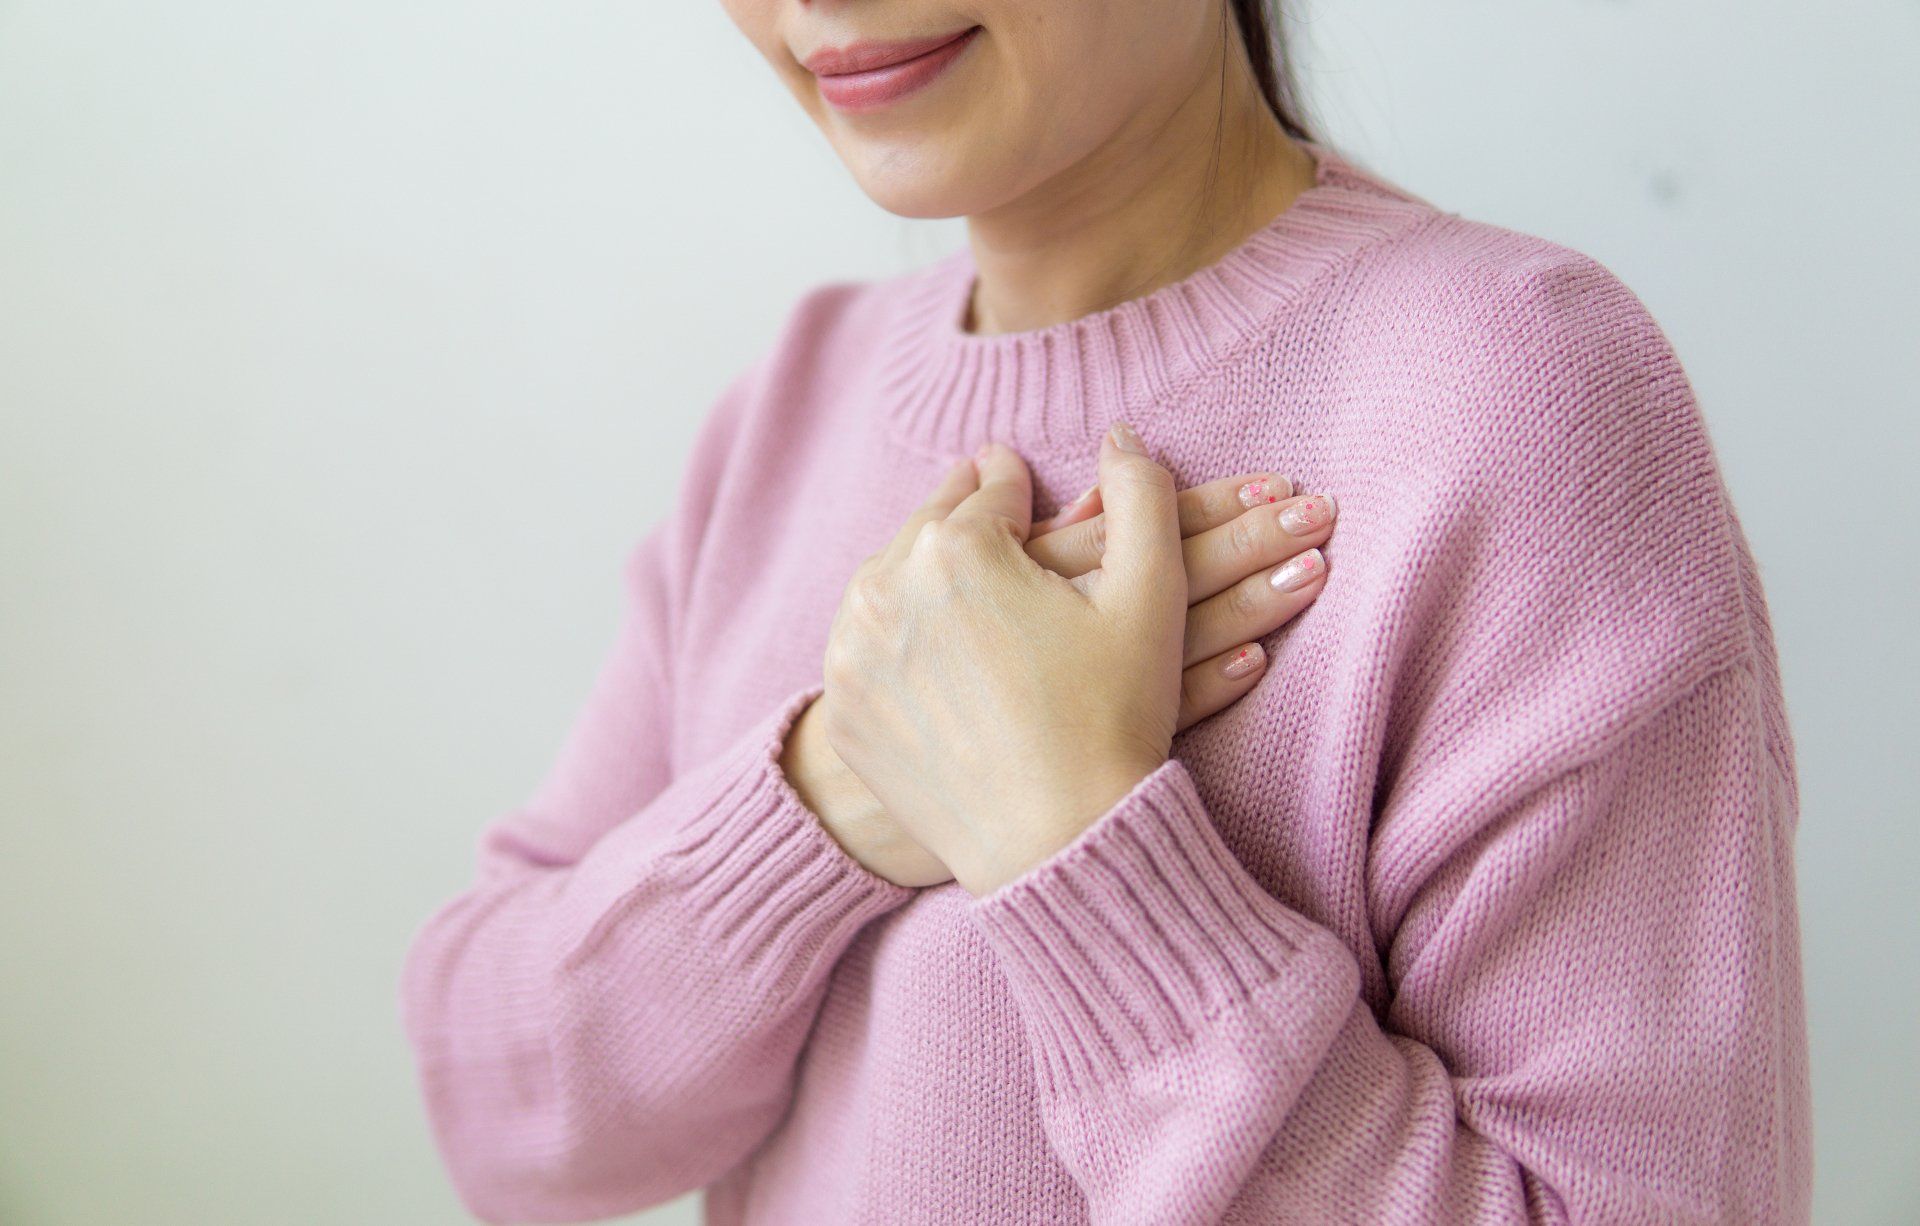 A woman in a pink sweater is holding her hands to her chest.